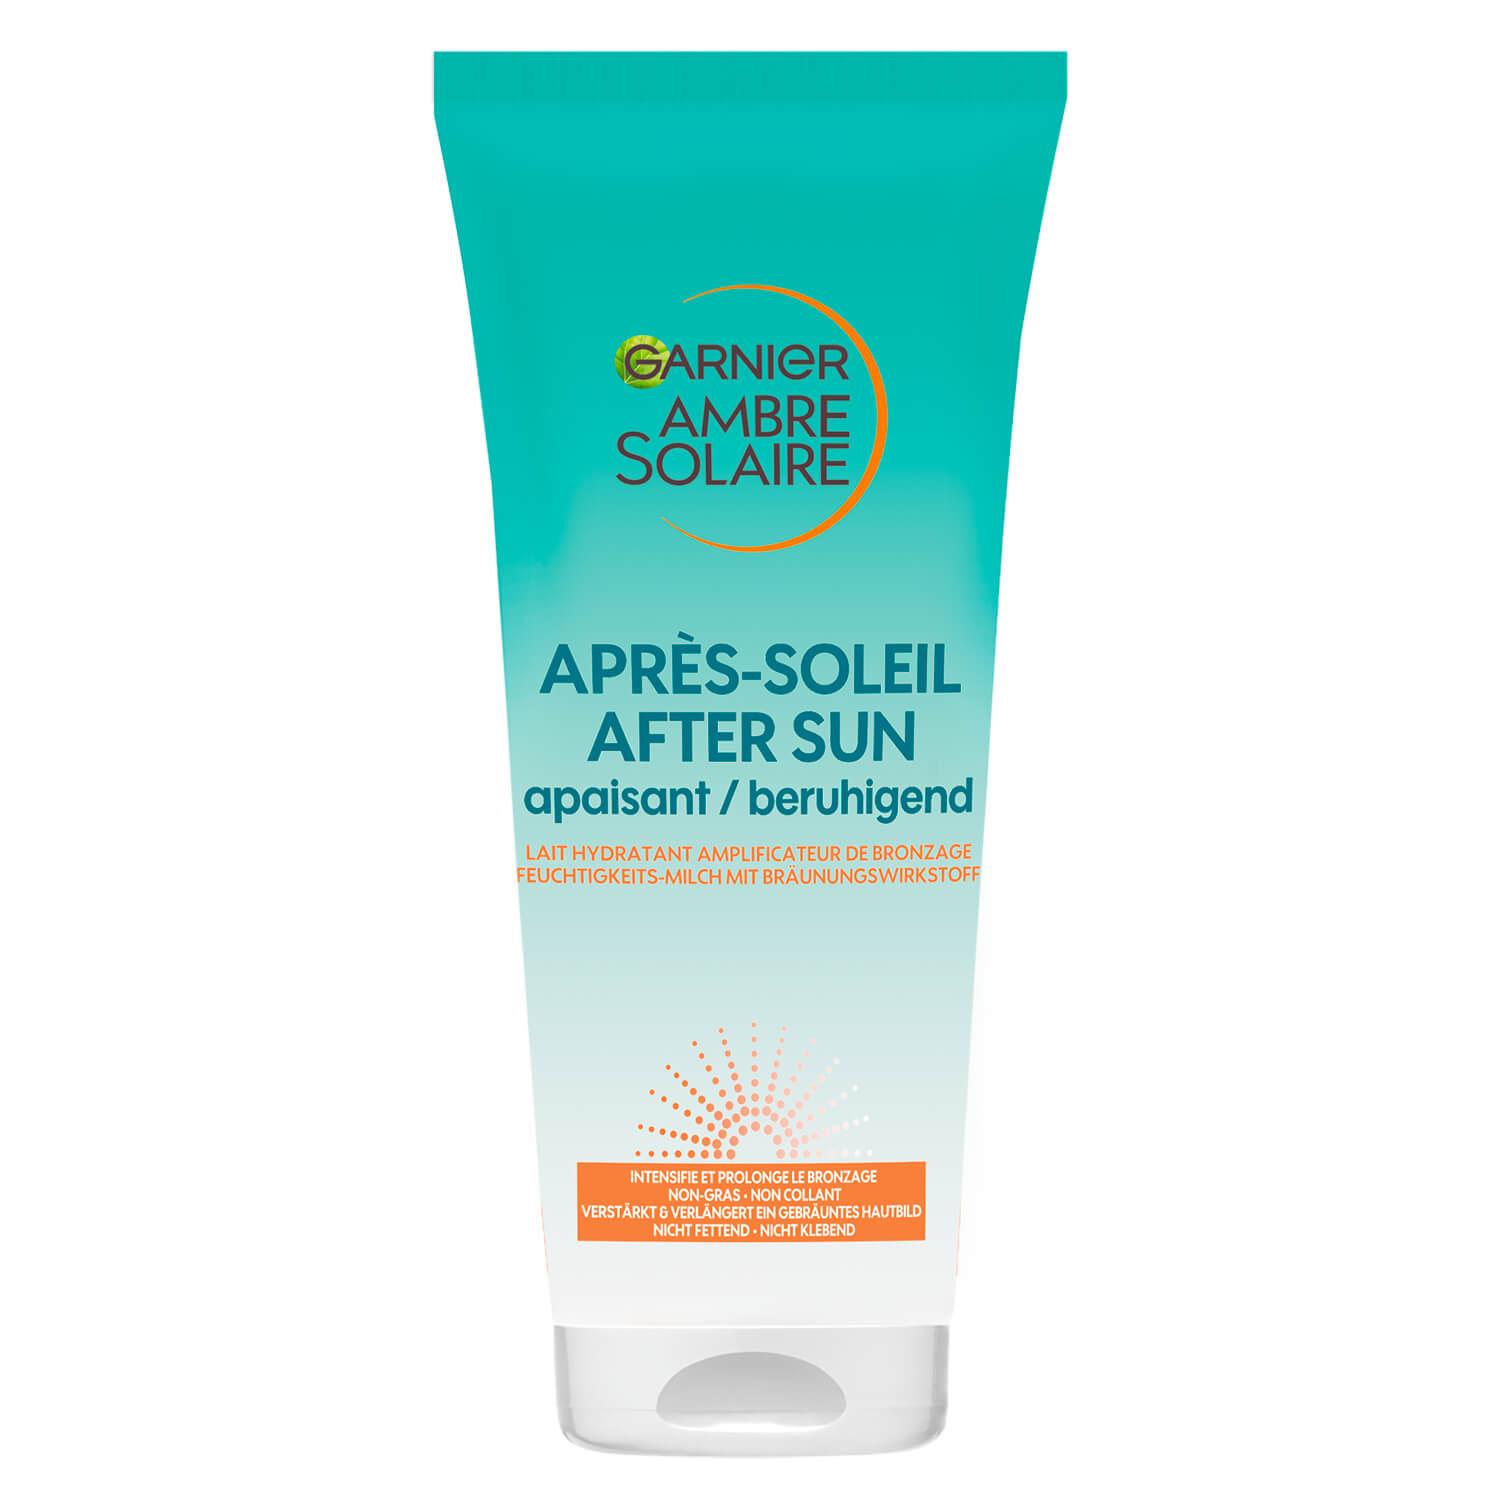 Ambre Solaire - After Sun Bronzing Hydrating Milk